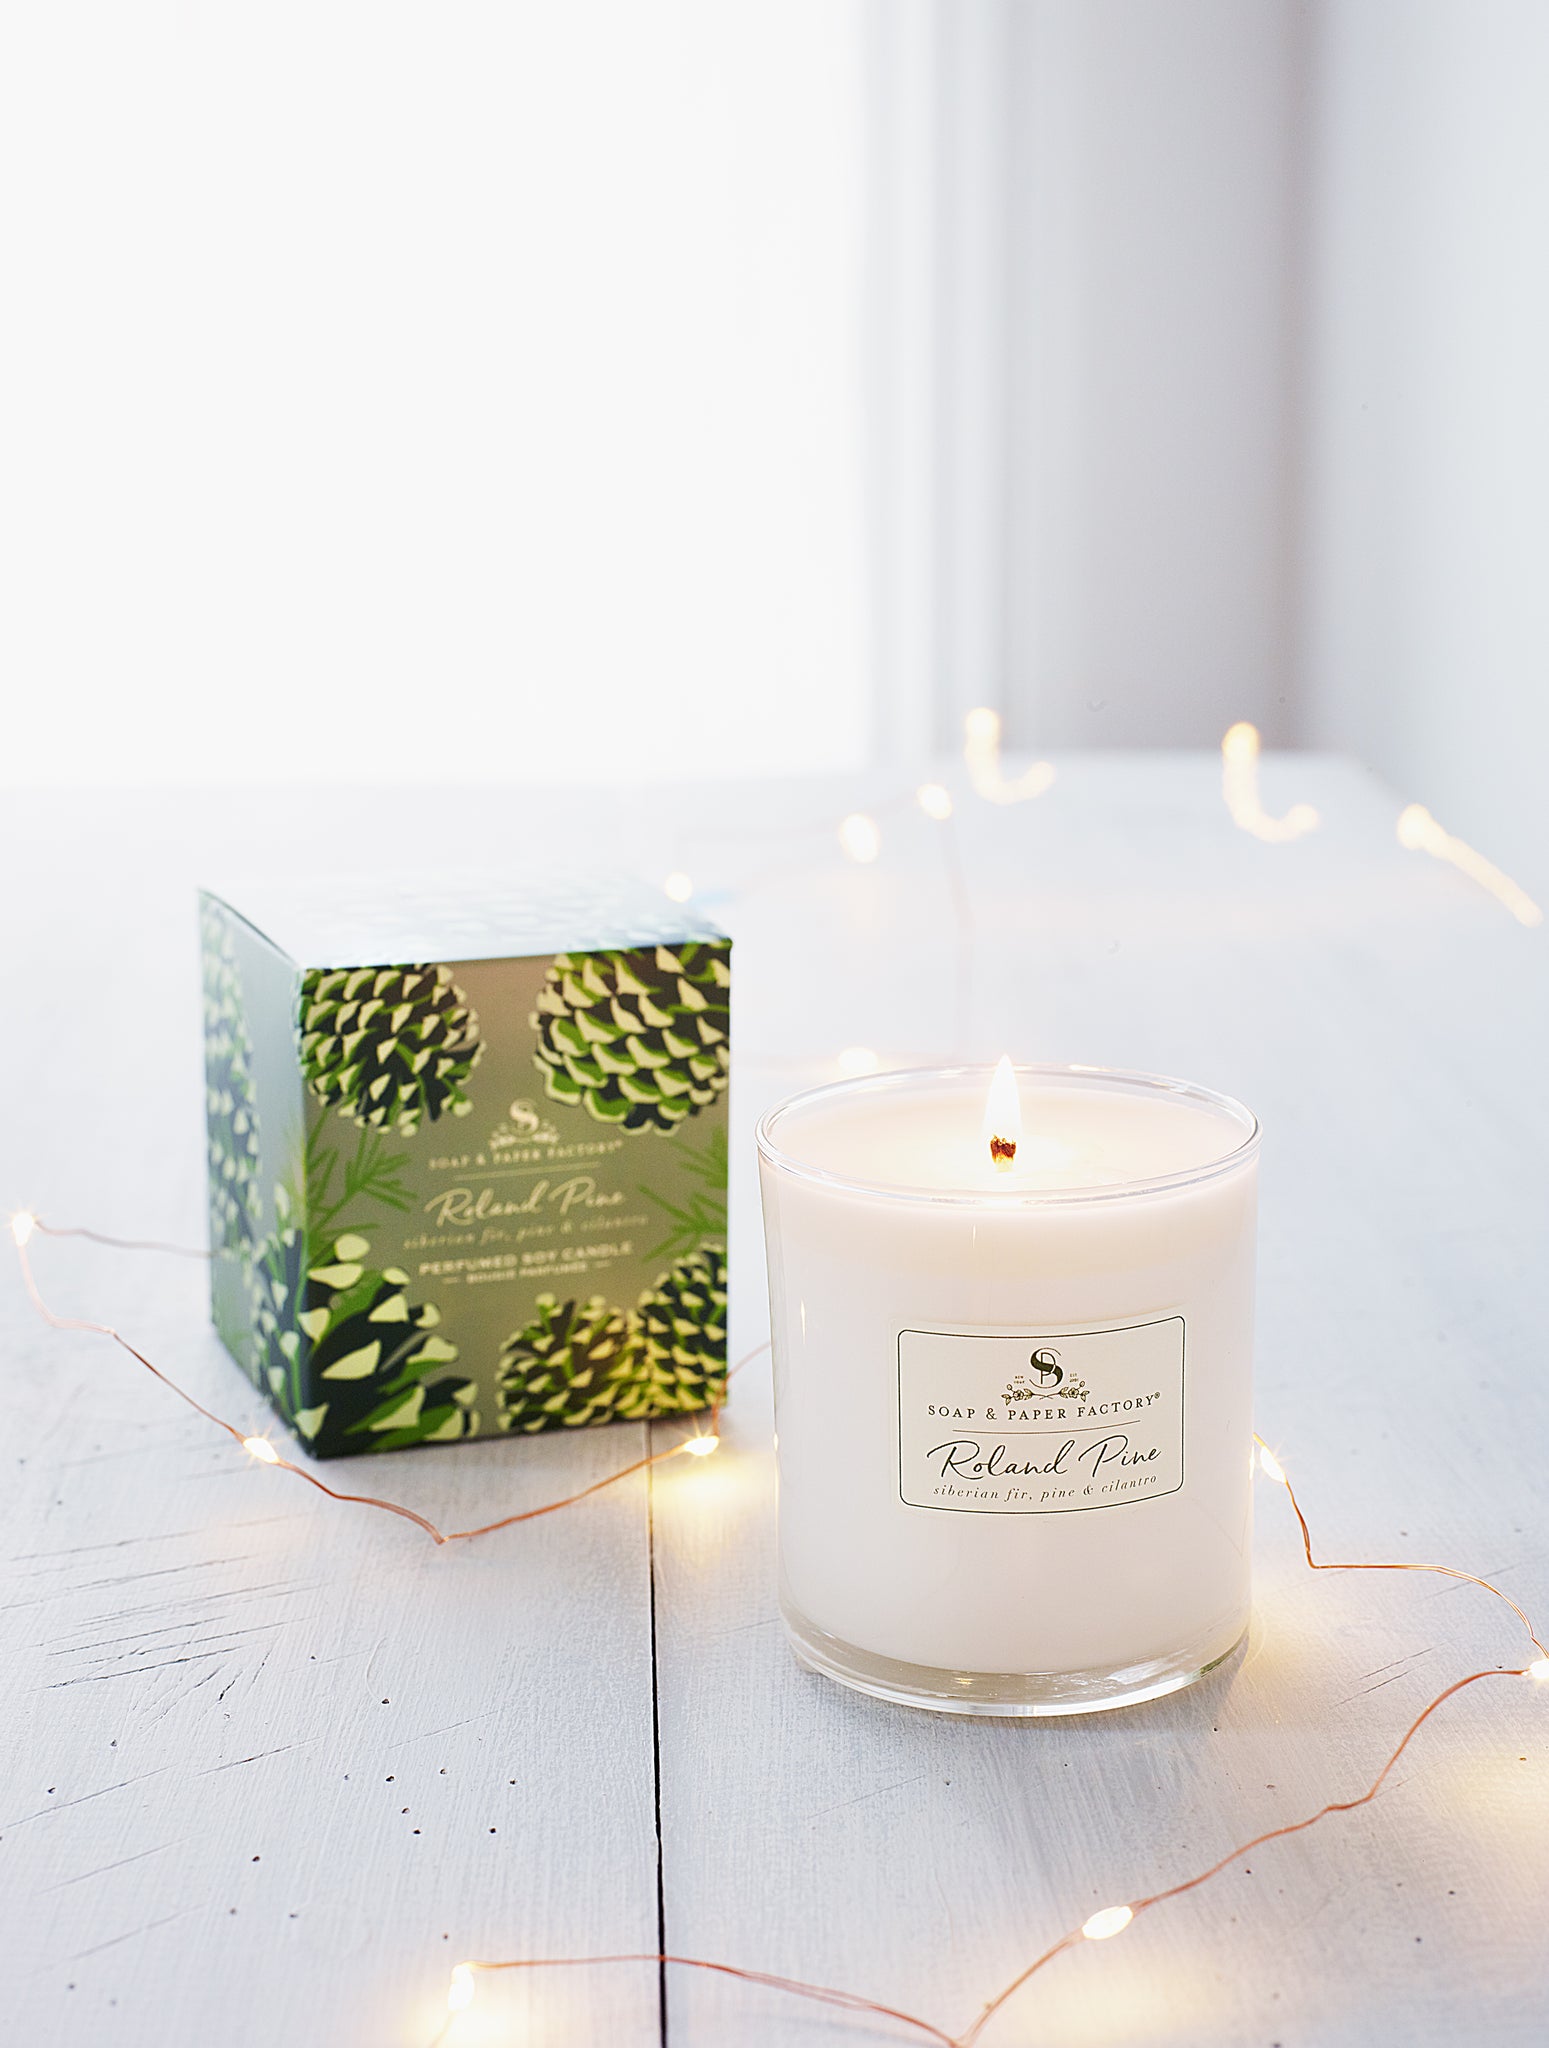 ROLAND PINE is packed with pine, Siberian fir & cilantro. its fresh, optimistic and mouthwateringly festive and is the best Christmas candle around!